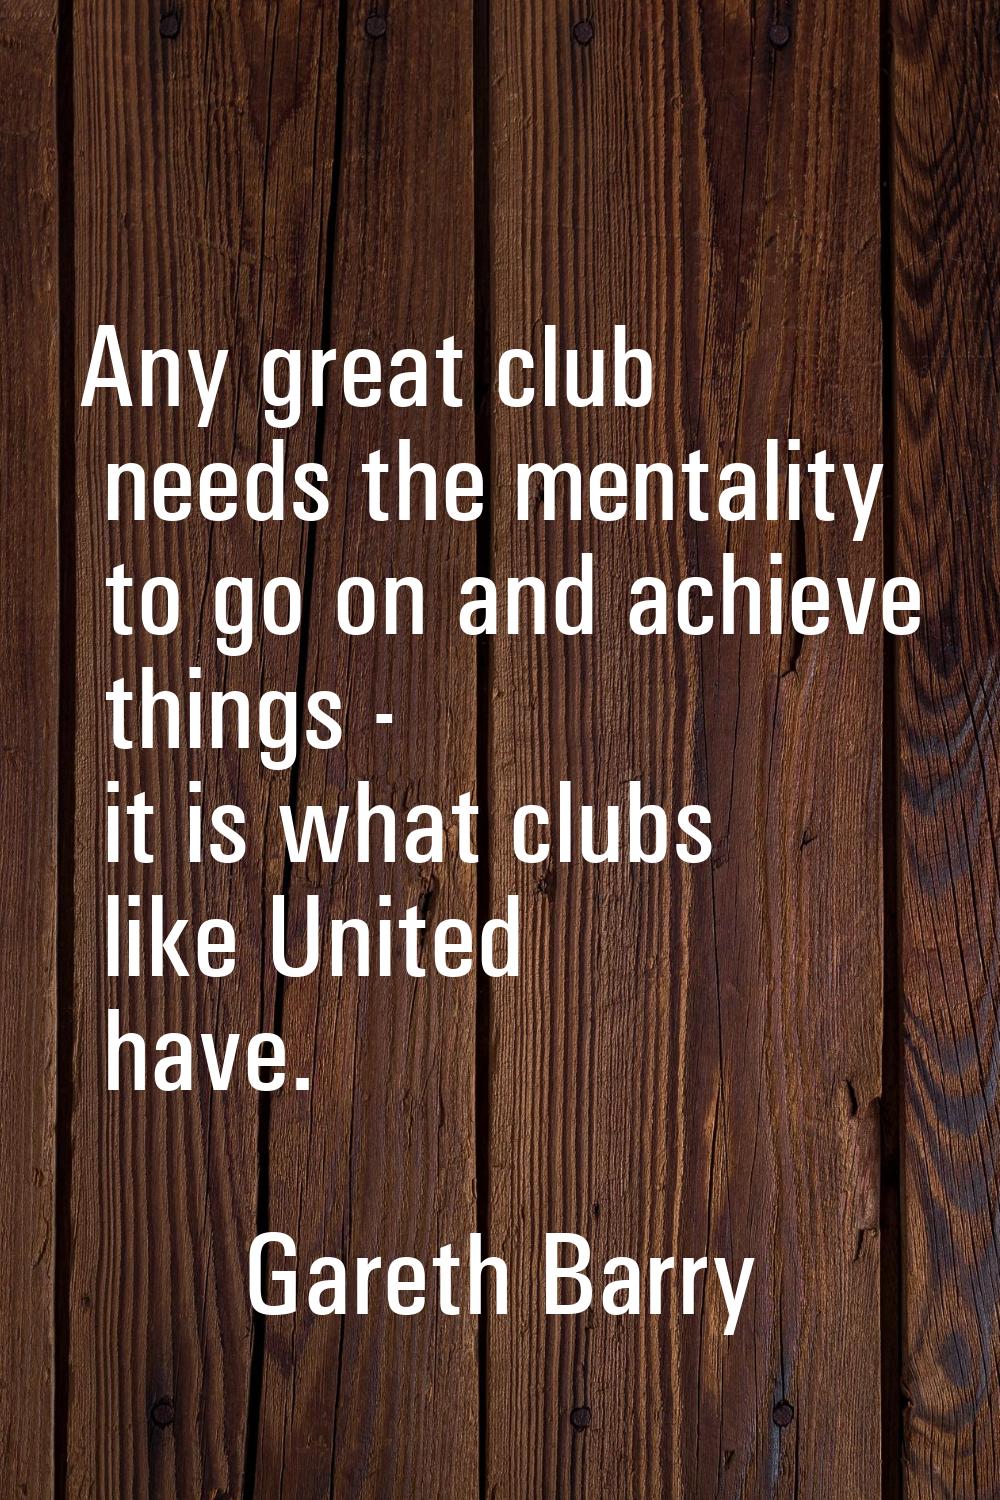 Any great club needs the mentality to go on and achieve things - it is what clubs like United have.